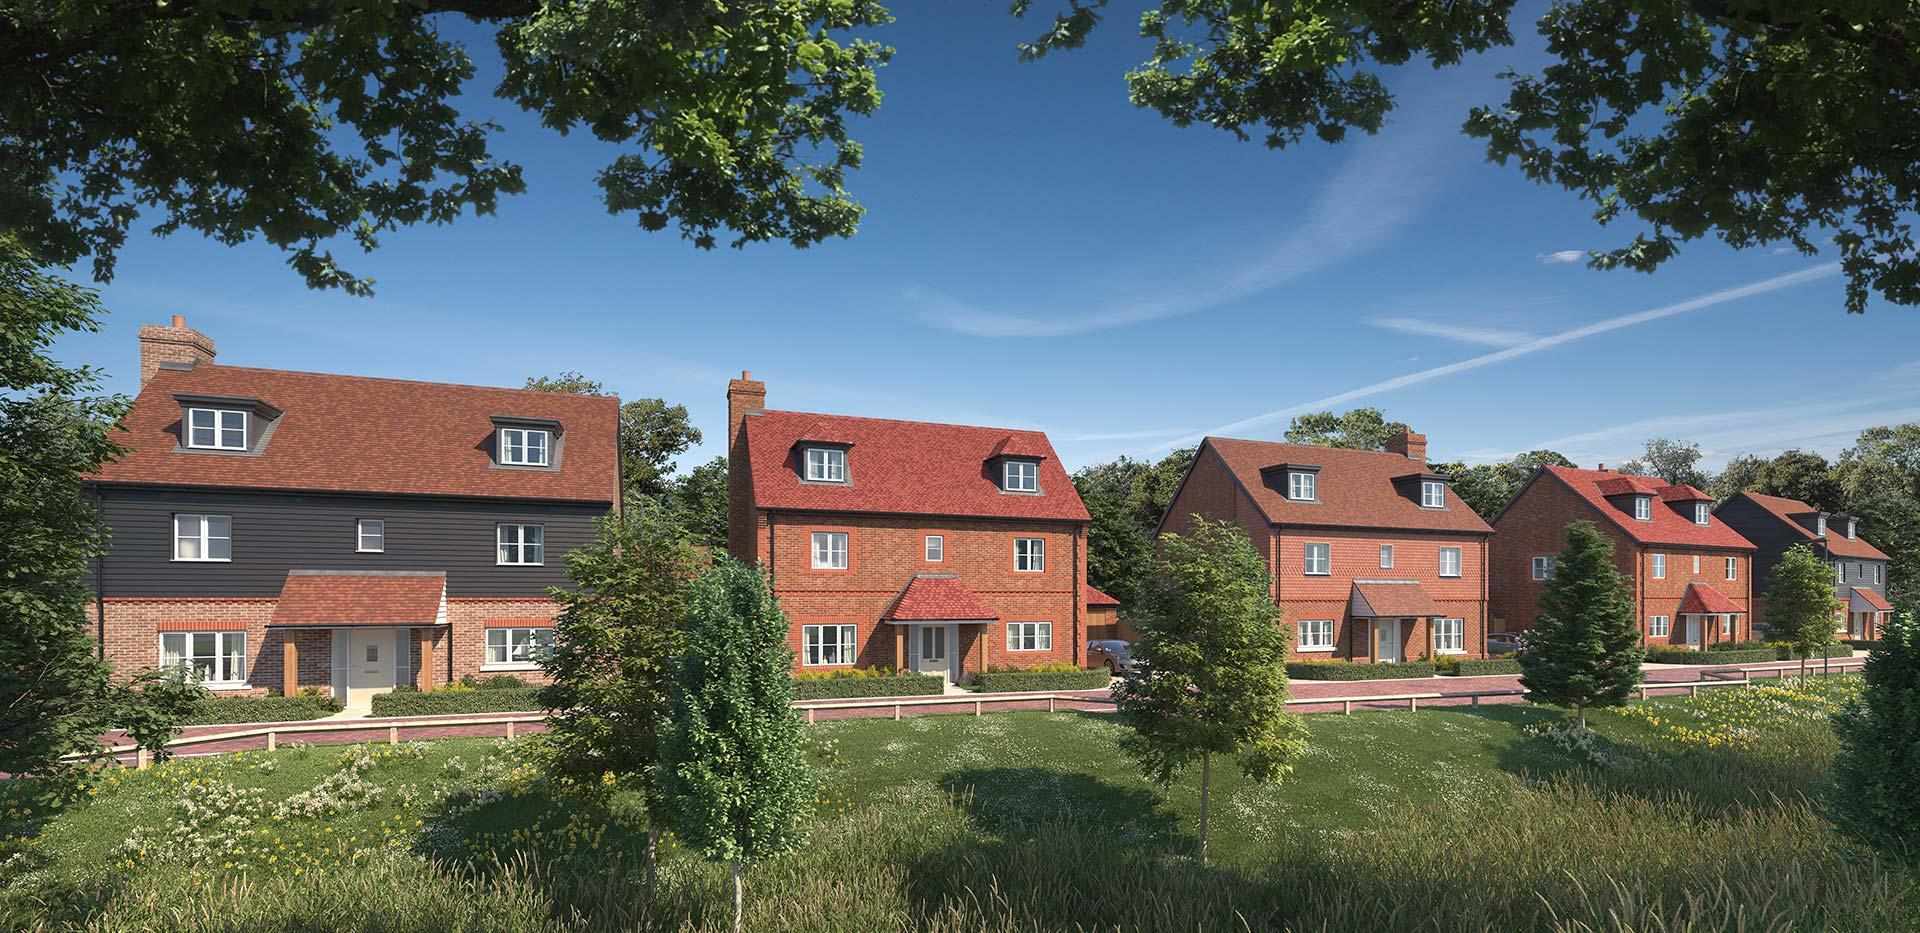 Berkeley, Abbey Barn Park, Upcoming Homes, Properties 52, 53, 54, 55 and 56 View 2